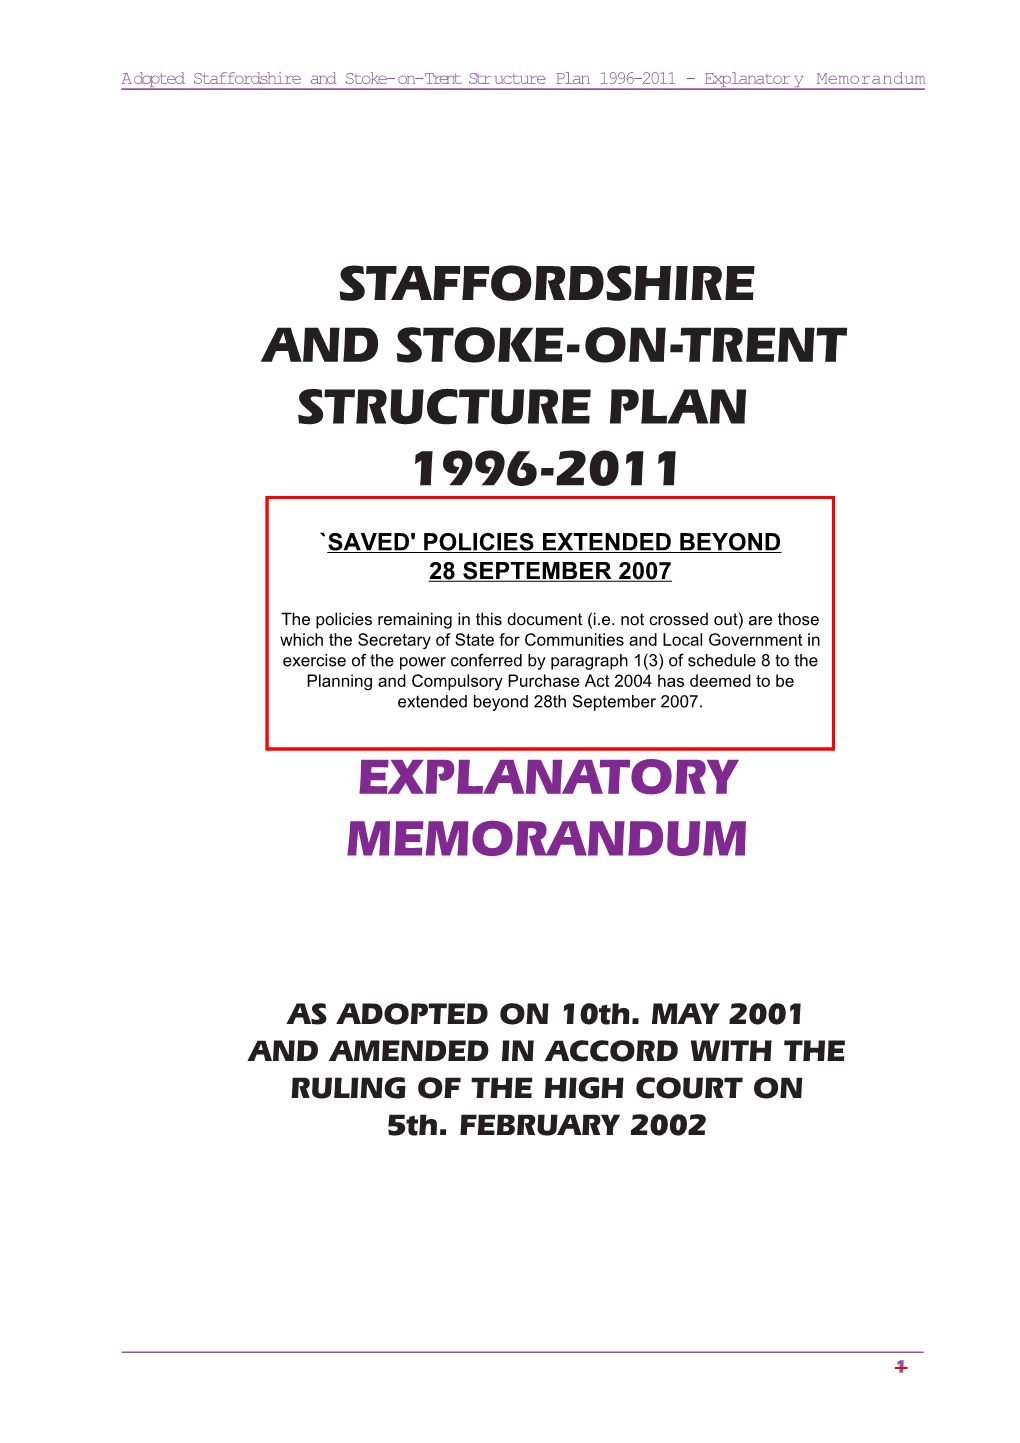 Staffordshire and Stoke-On-Trent Structure Plan 1996-2011